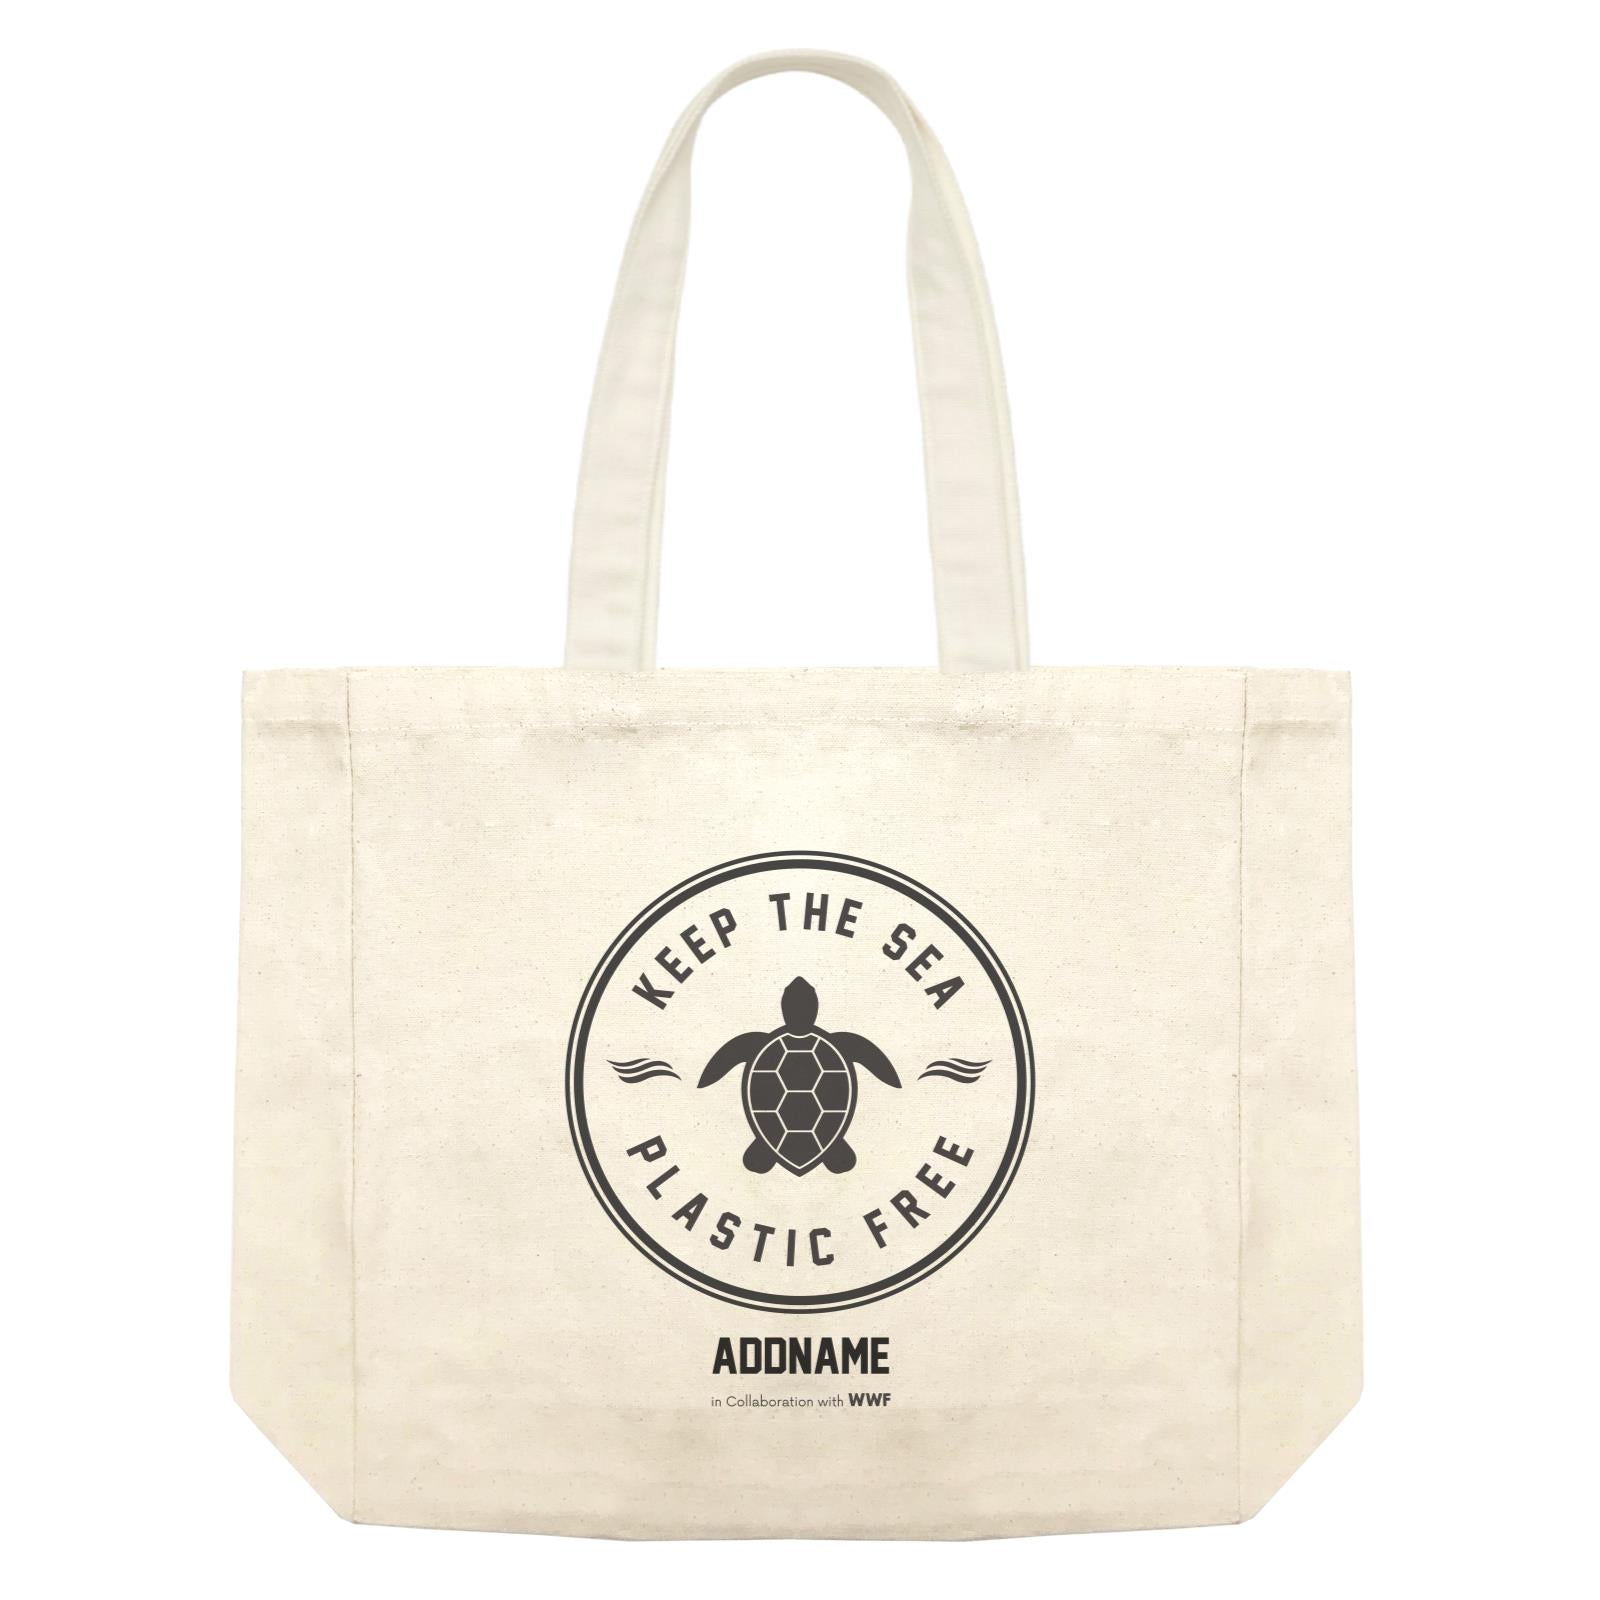 Keep The Sea Plastic Free Turtle Stamp Addname Shopping Bag